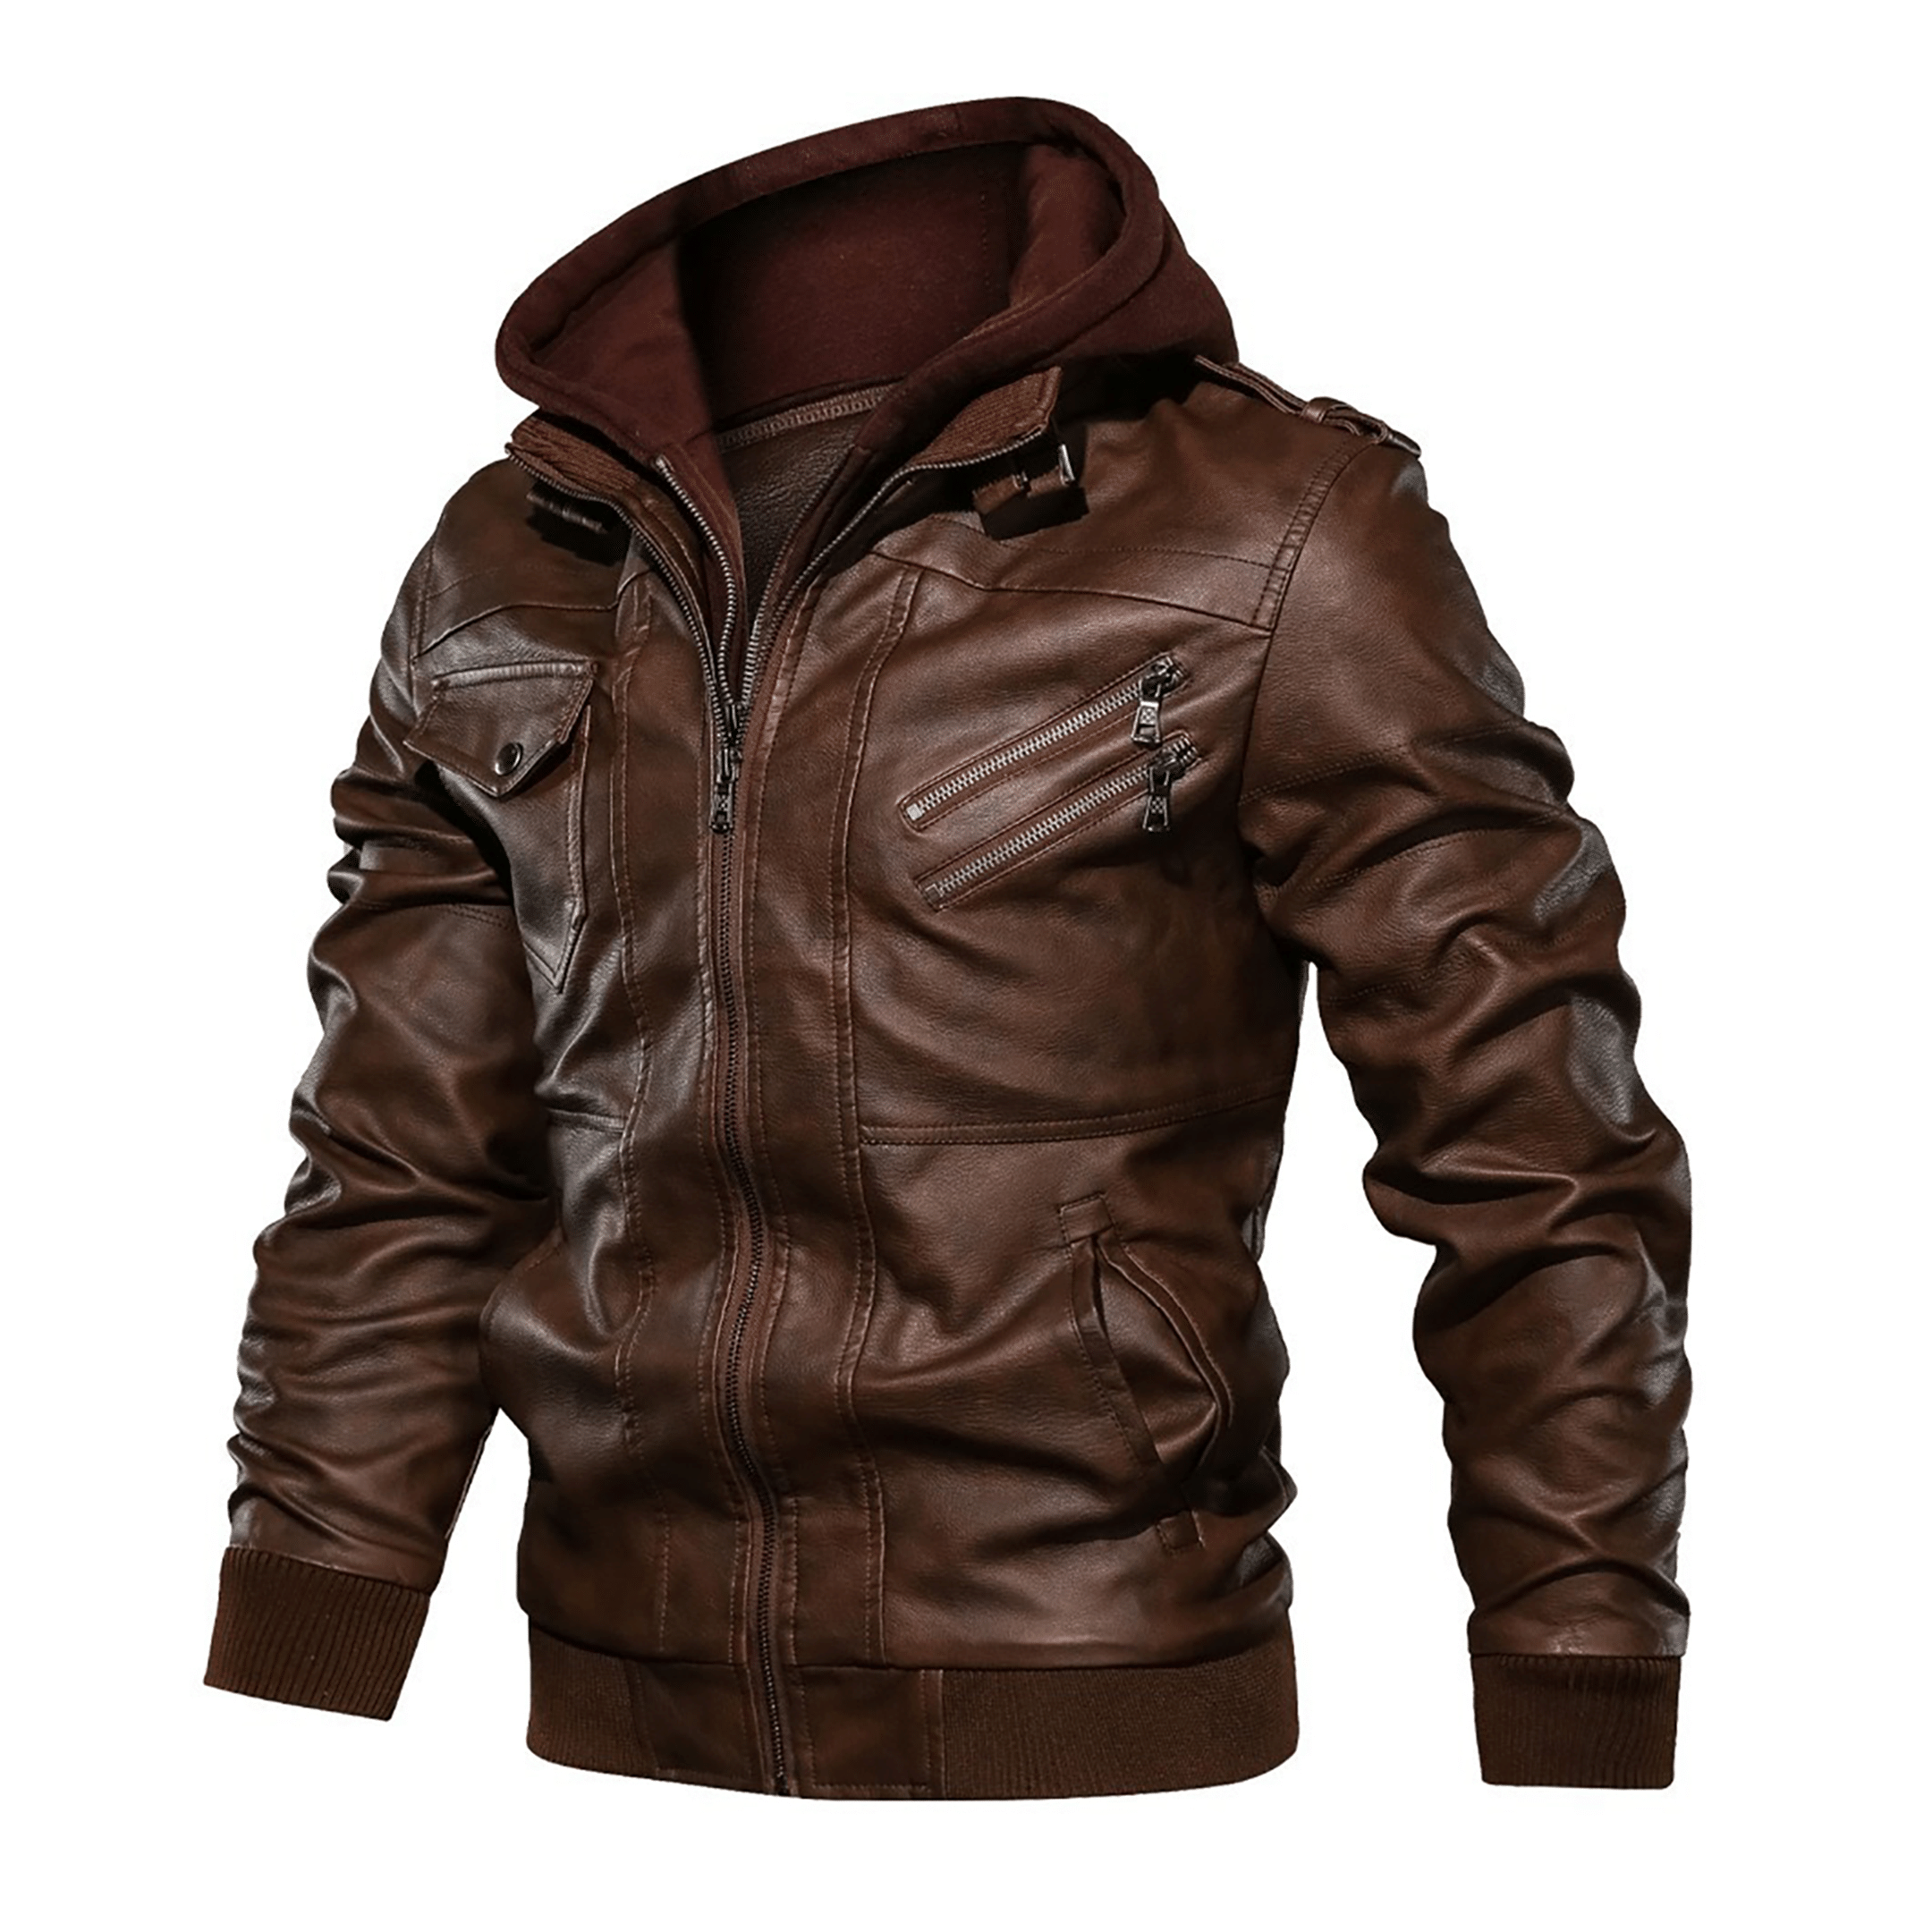 Top leather jackets and latest products 193